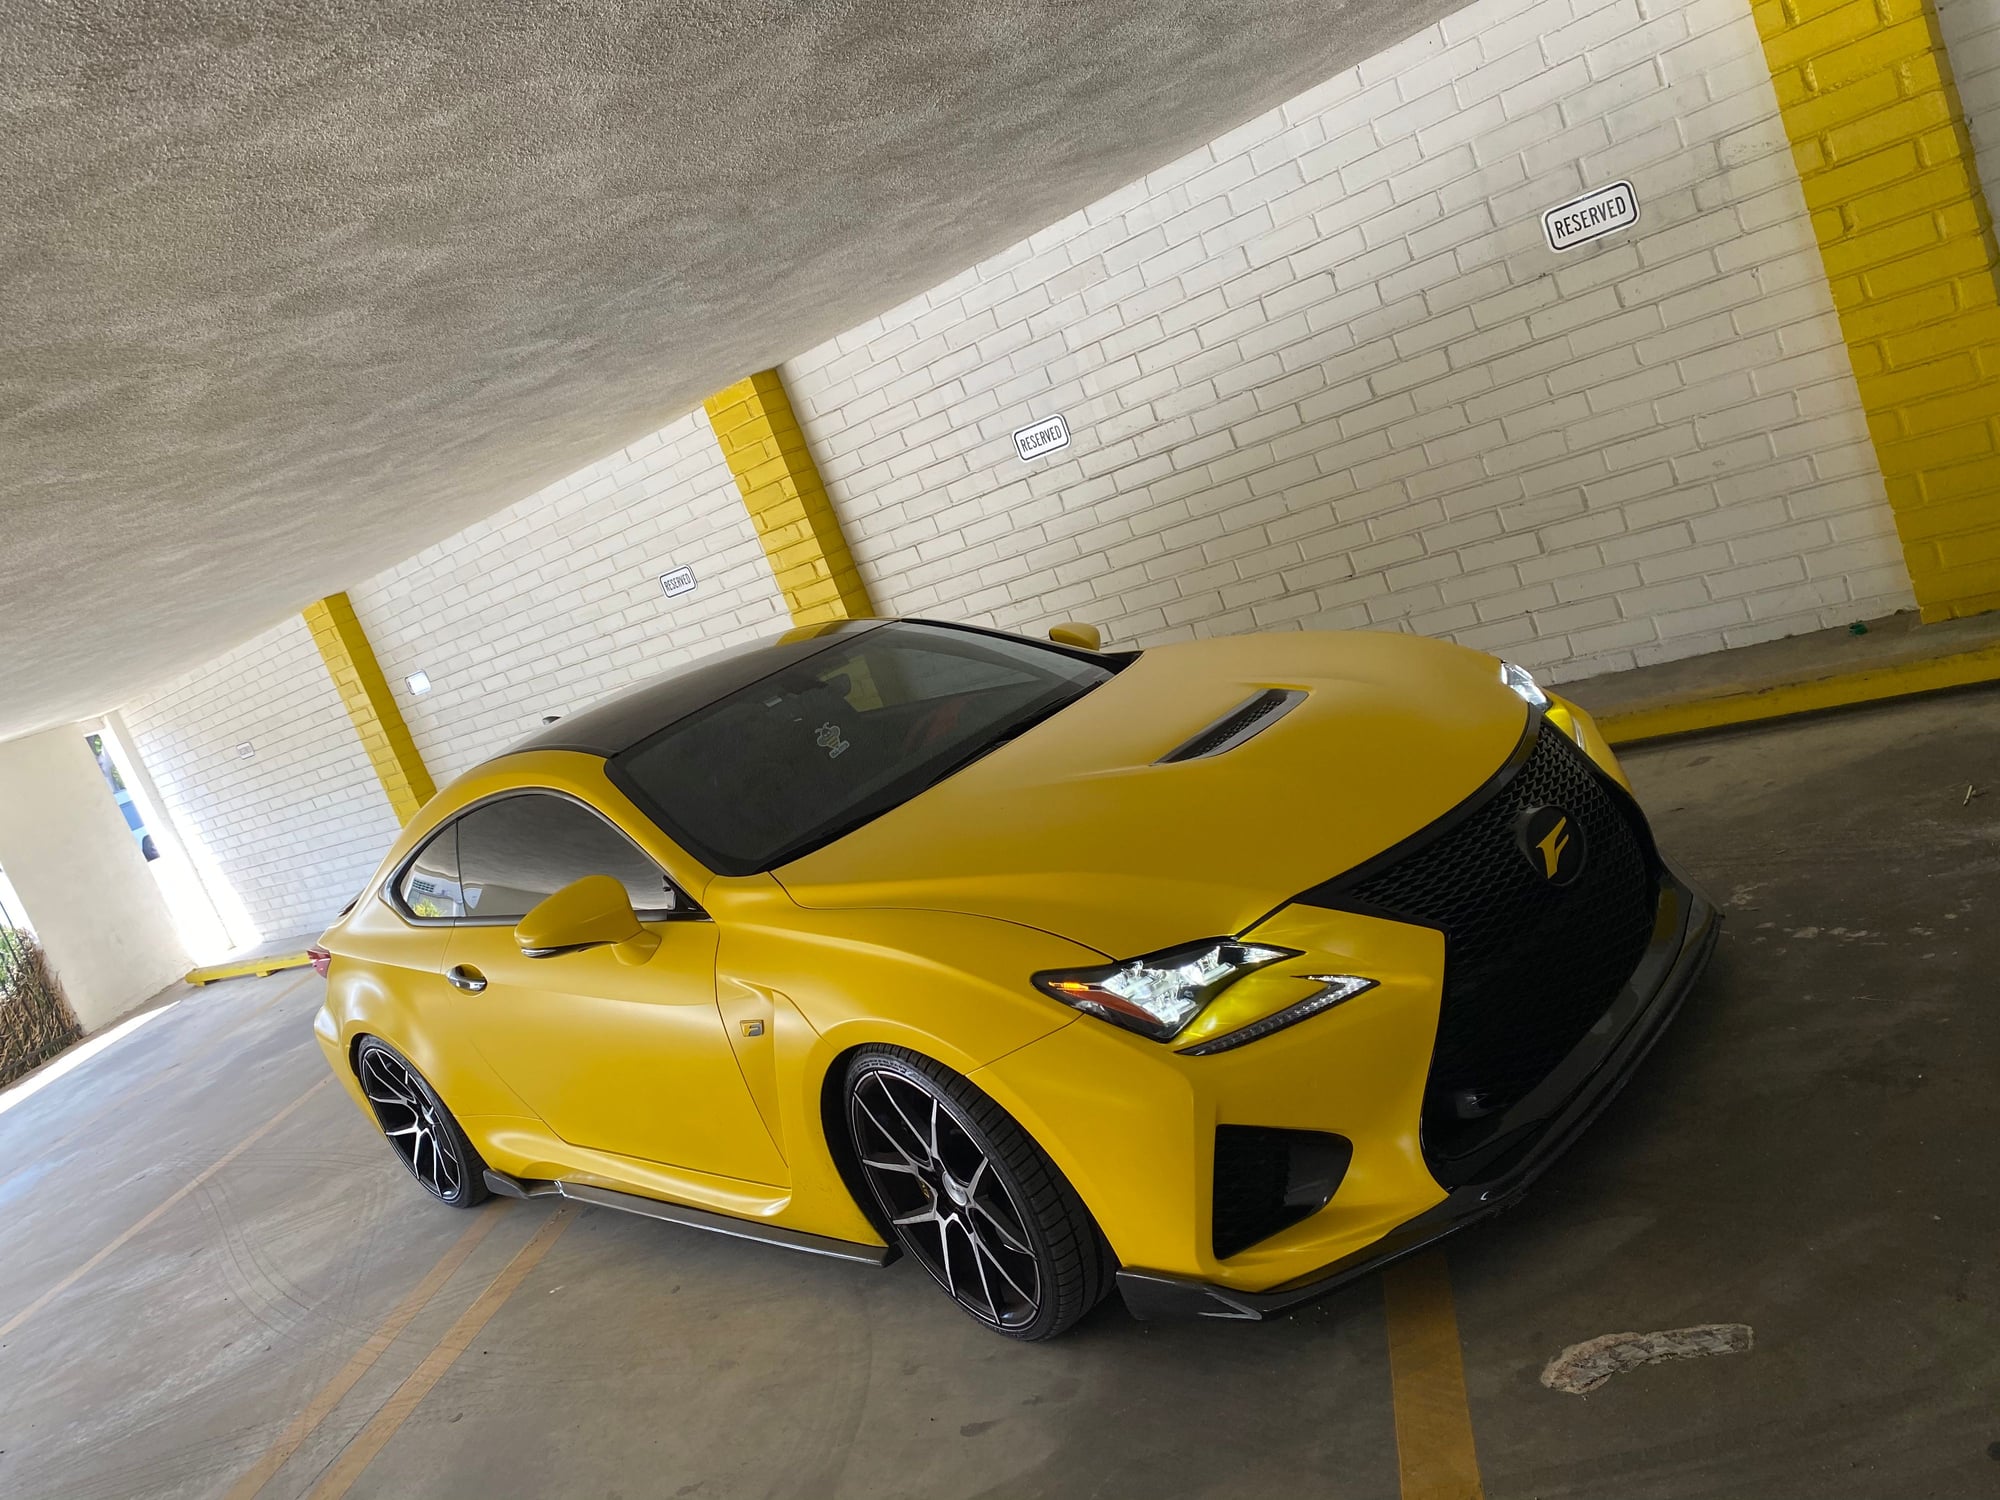 2015 Lexus RC F - 2015 Lexus RCF / Nebula Gray Pearl/ Circuit Red - Used - VIN JTHHP5BC3F5002080 - 60,200 Miles - 8 cyl - 2WD - Automatic - Coupe - Yellow - North Hollywood Ca, CA 91601, United States